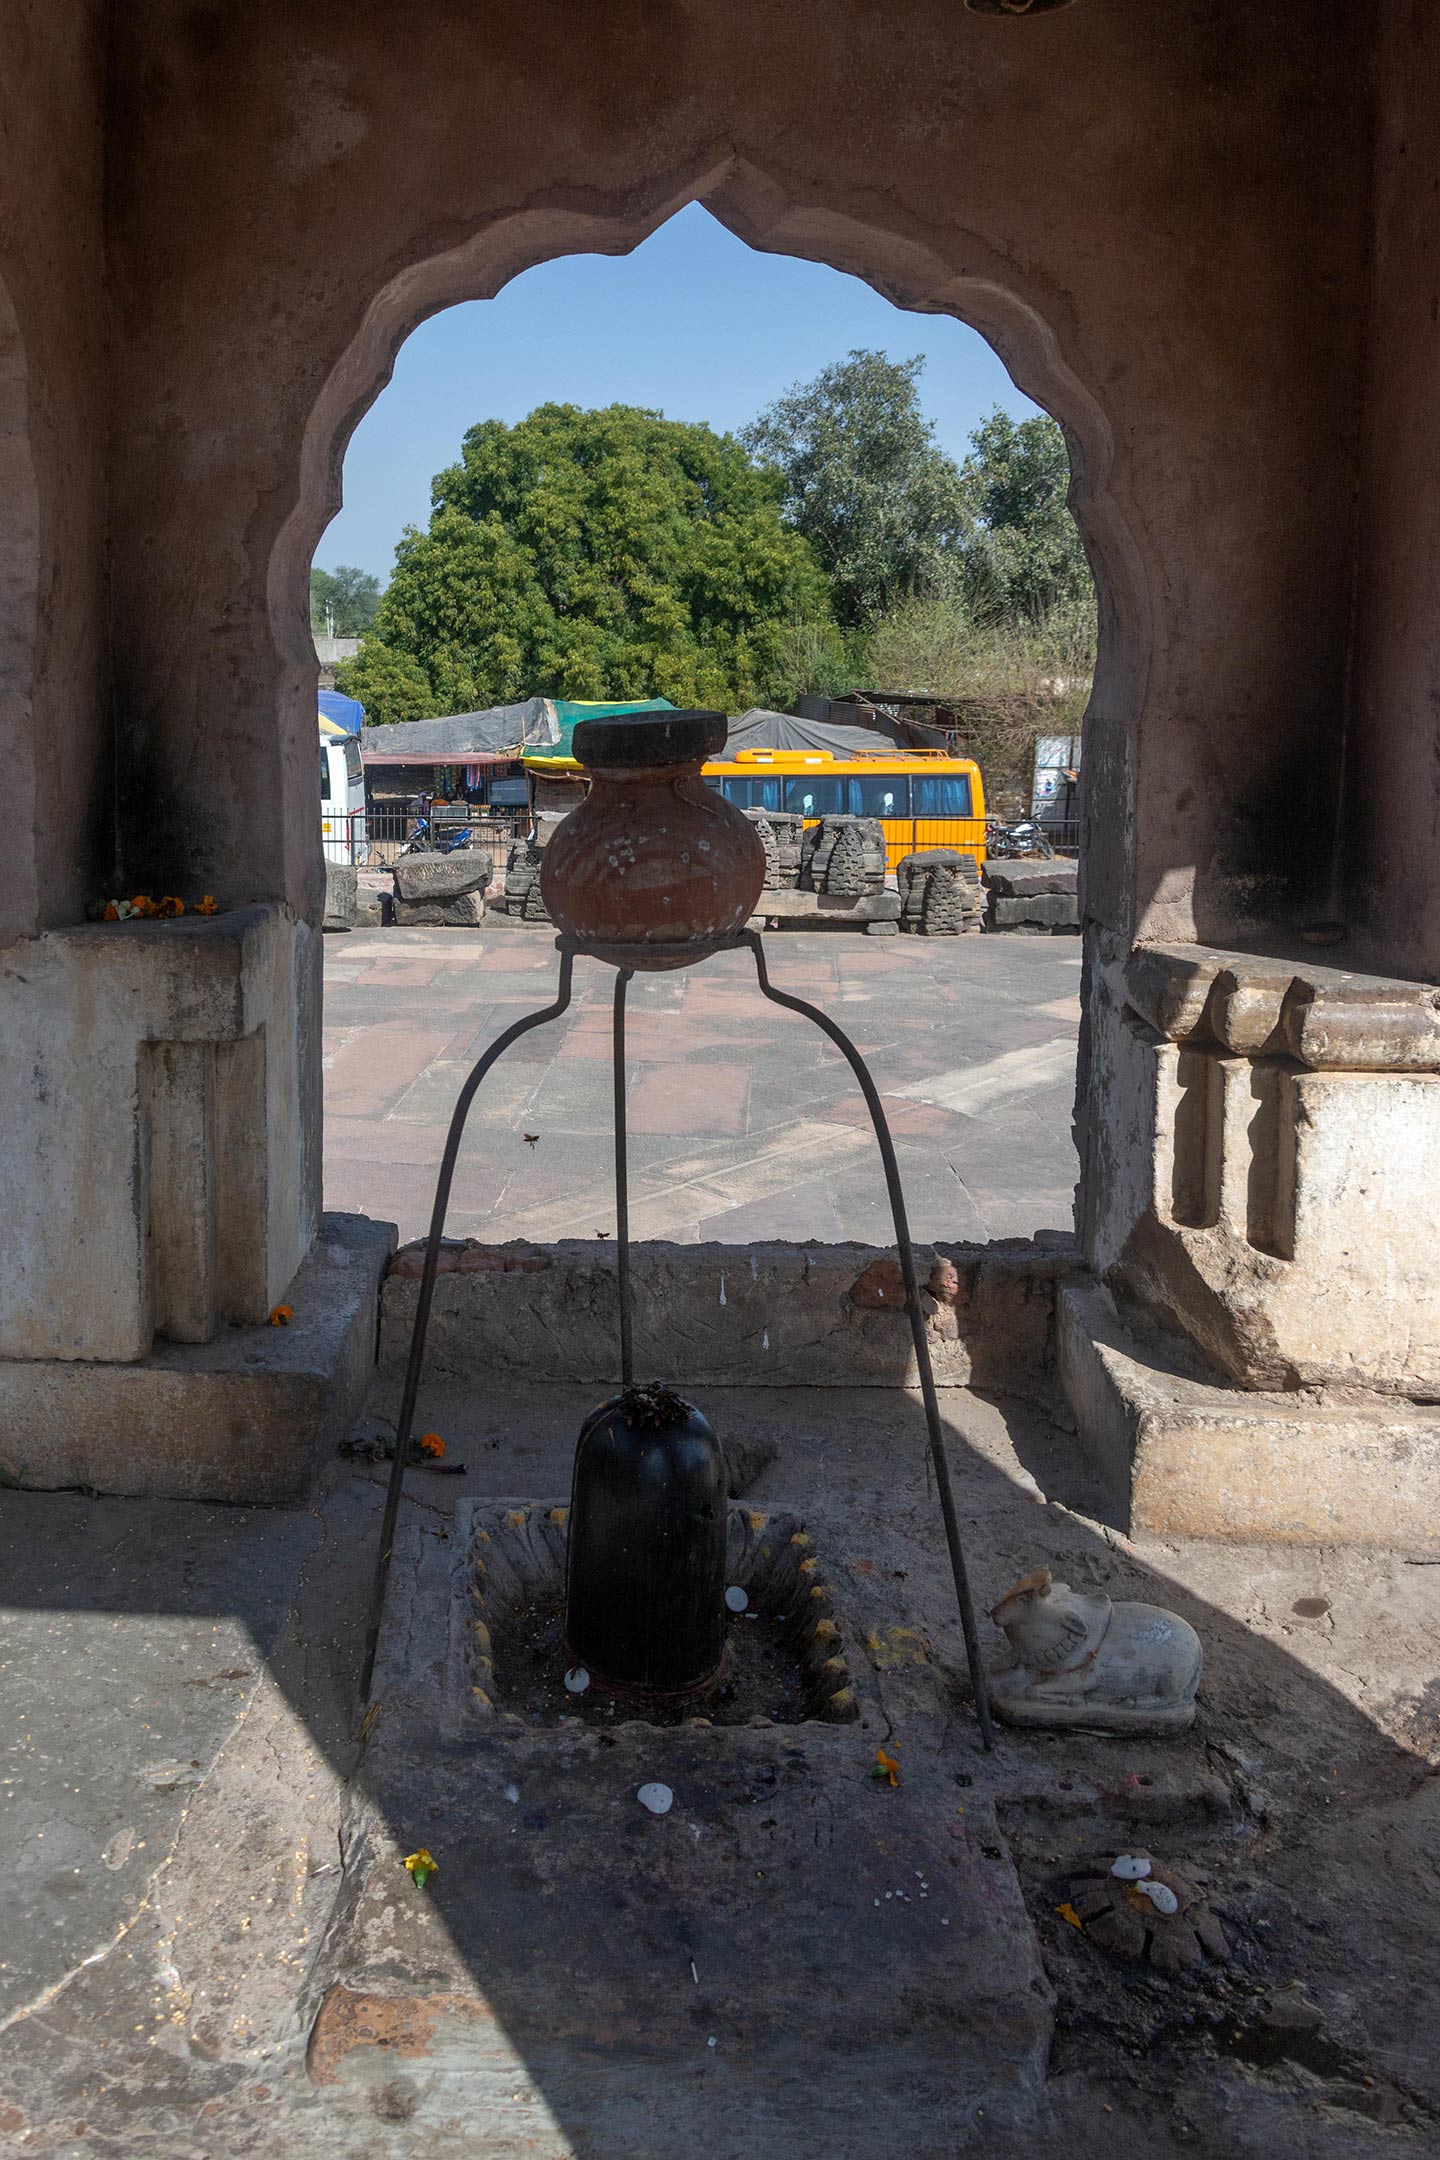 A small shrine, possibly a newer construction, is placed off-centred to the right facing the garbhagriha. Further steps lead to the third level, on a projected platform. A Shiva lingam made in black stone is installed inside with a Nandi figure next to it. An earthen pot is installed on a tripod which drips water over the Shiva lingam.